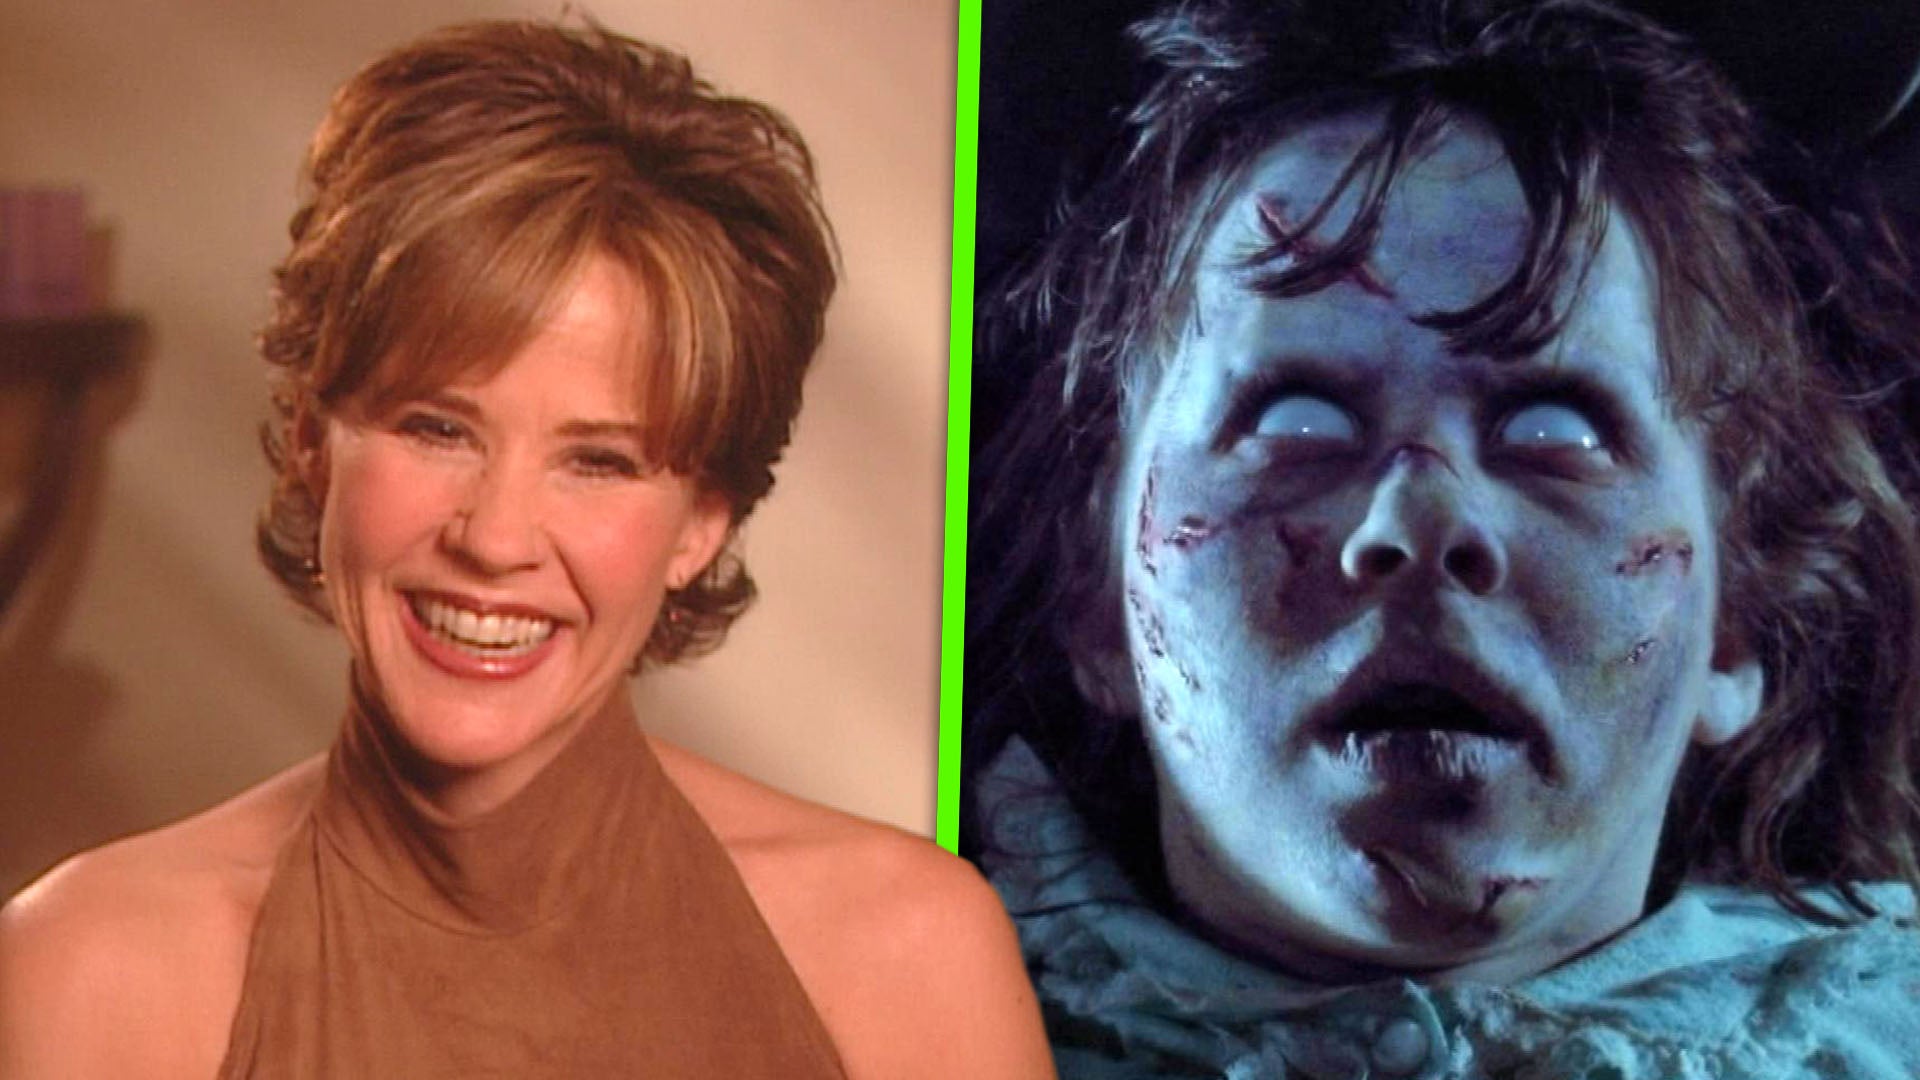 'The Exorcist': Behind-the-Scenes Stories From Linda Blair and William Friedkin (Flashback)